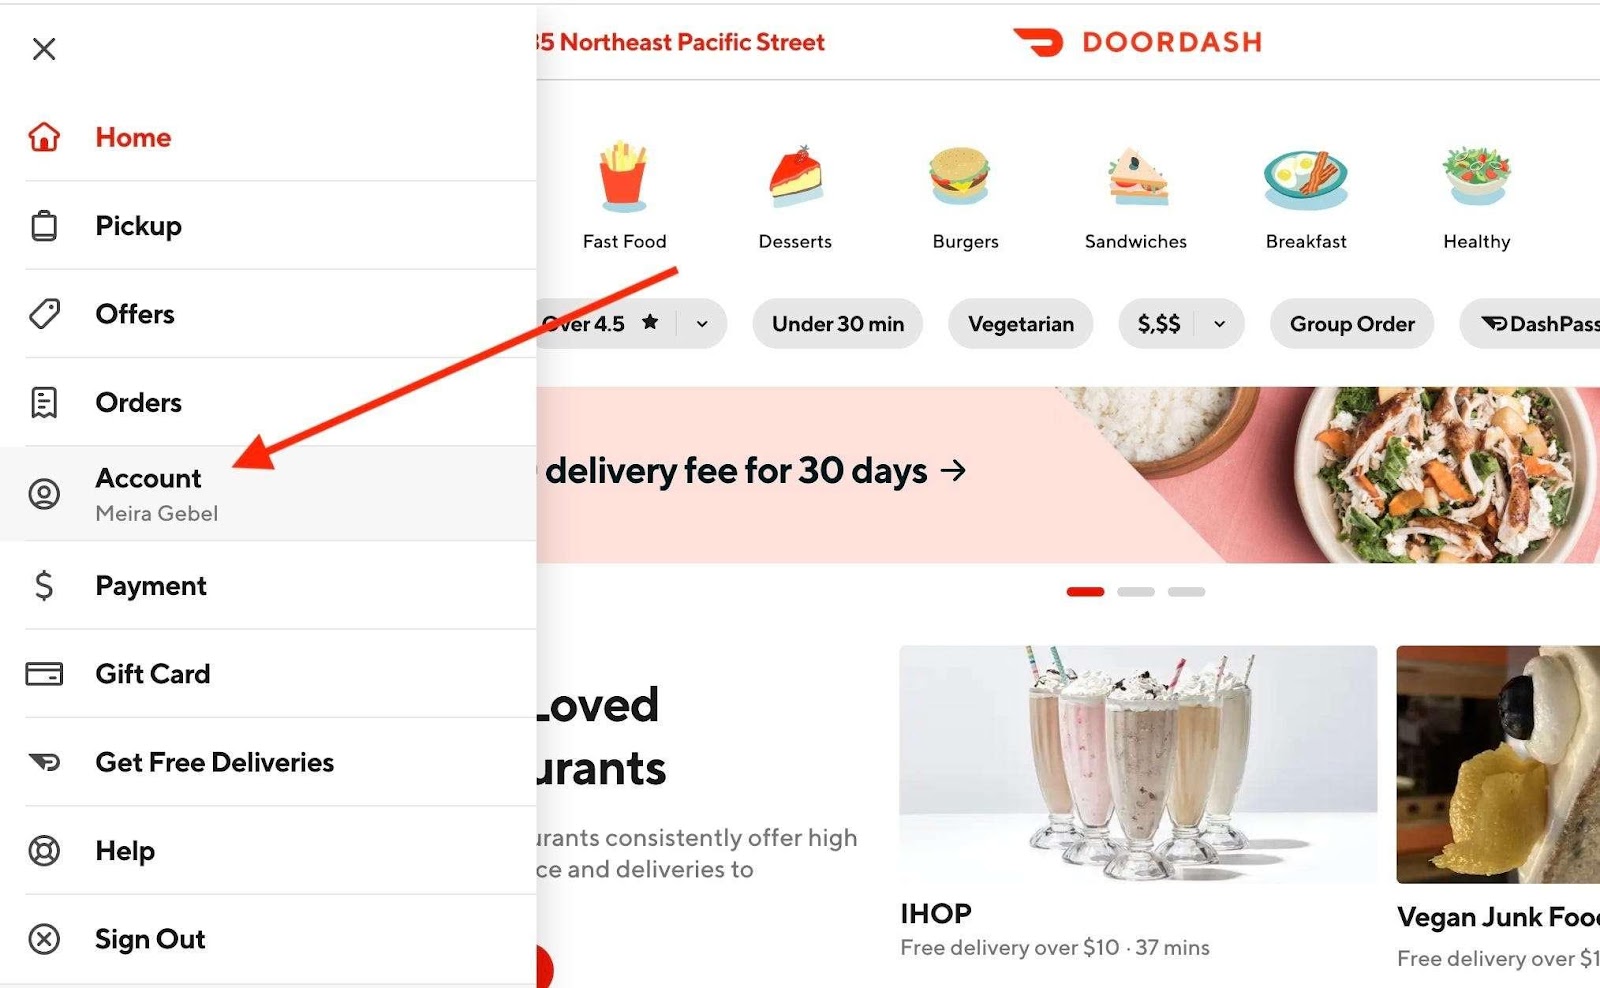 How to delete your DoorDash account when you no longer use the delivery service